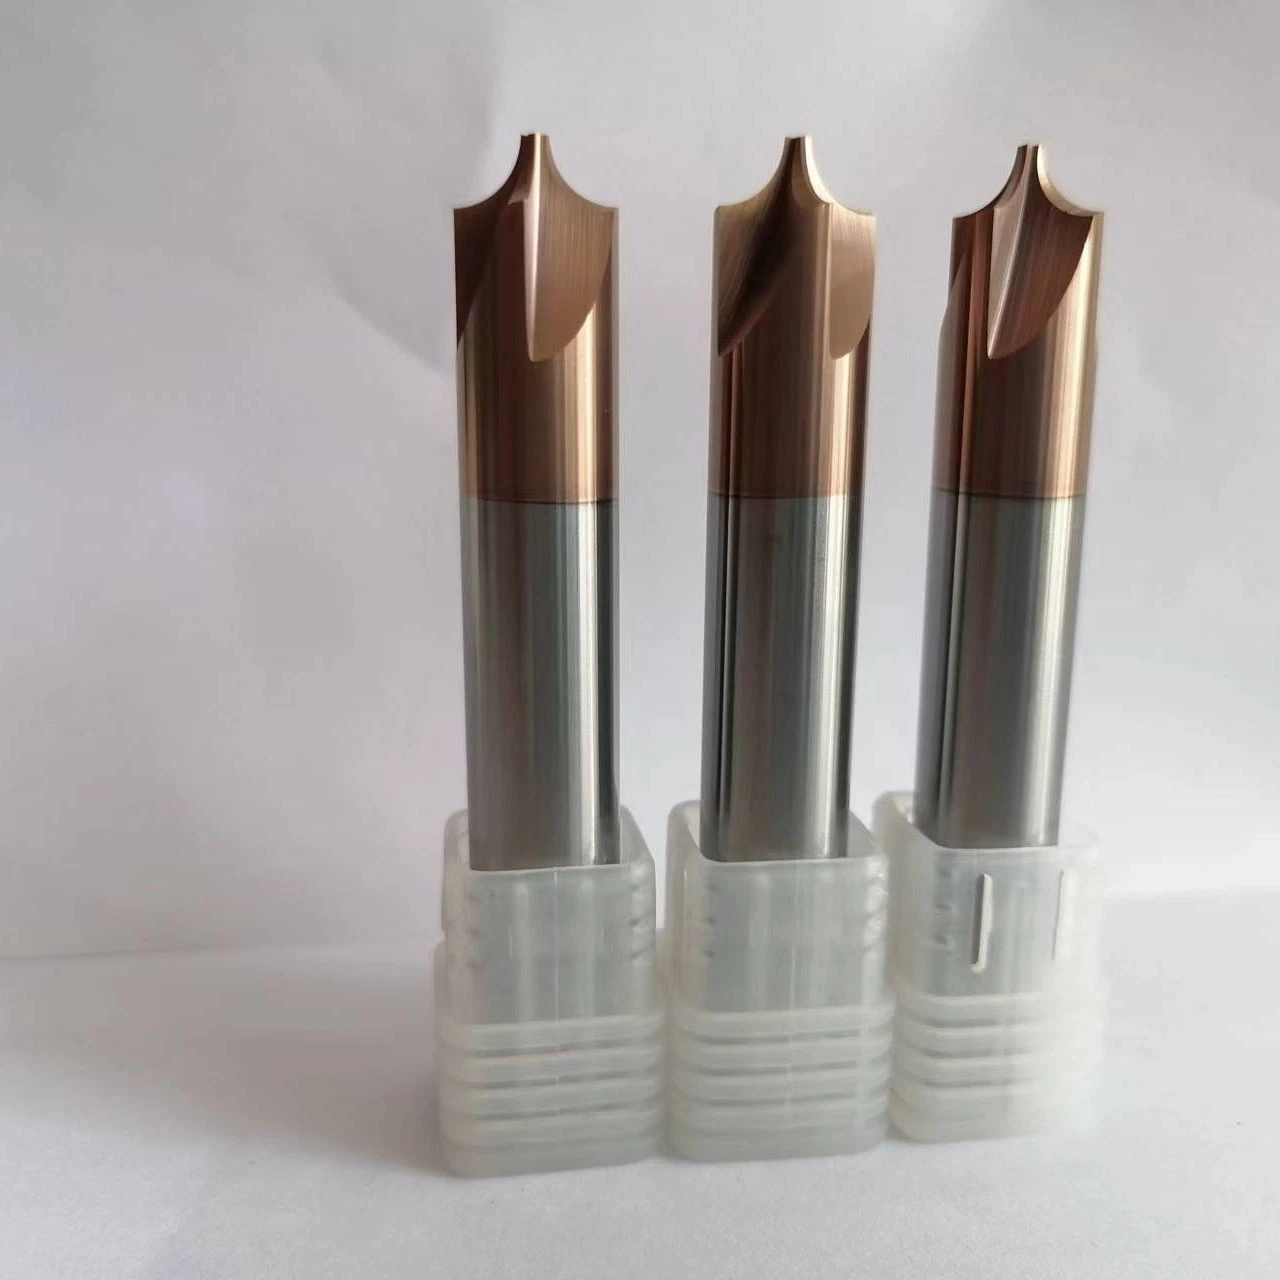 Changzhou 90 Degree Centering Drill HRC55/60 90 Degree Carbide Drills Solid Carbide Spotting Drill Bits for High Hardened Steels Cutting Tools